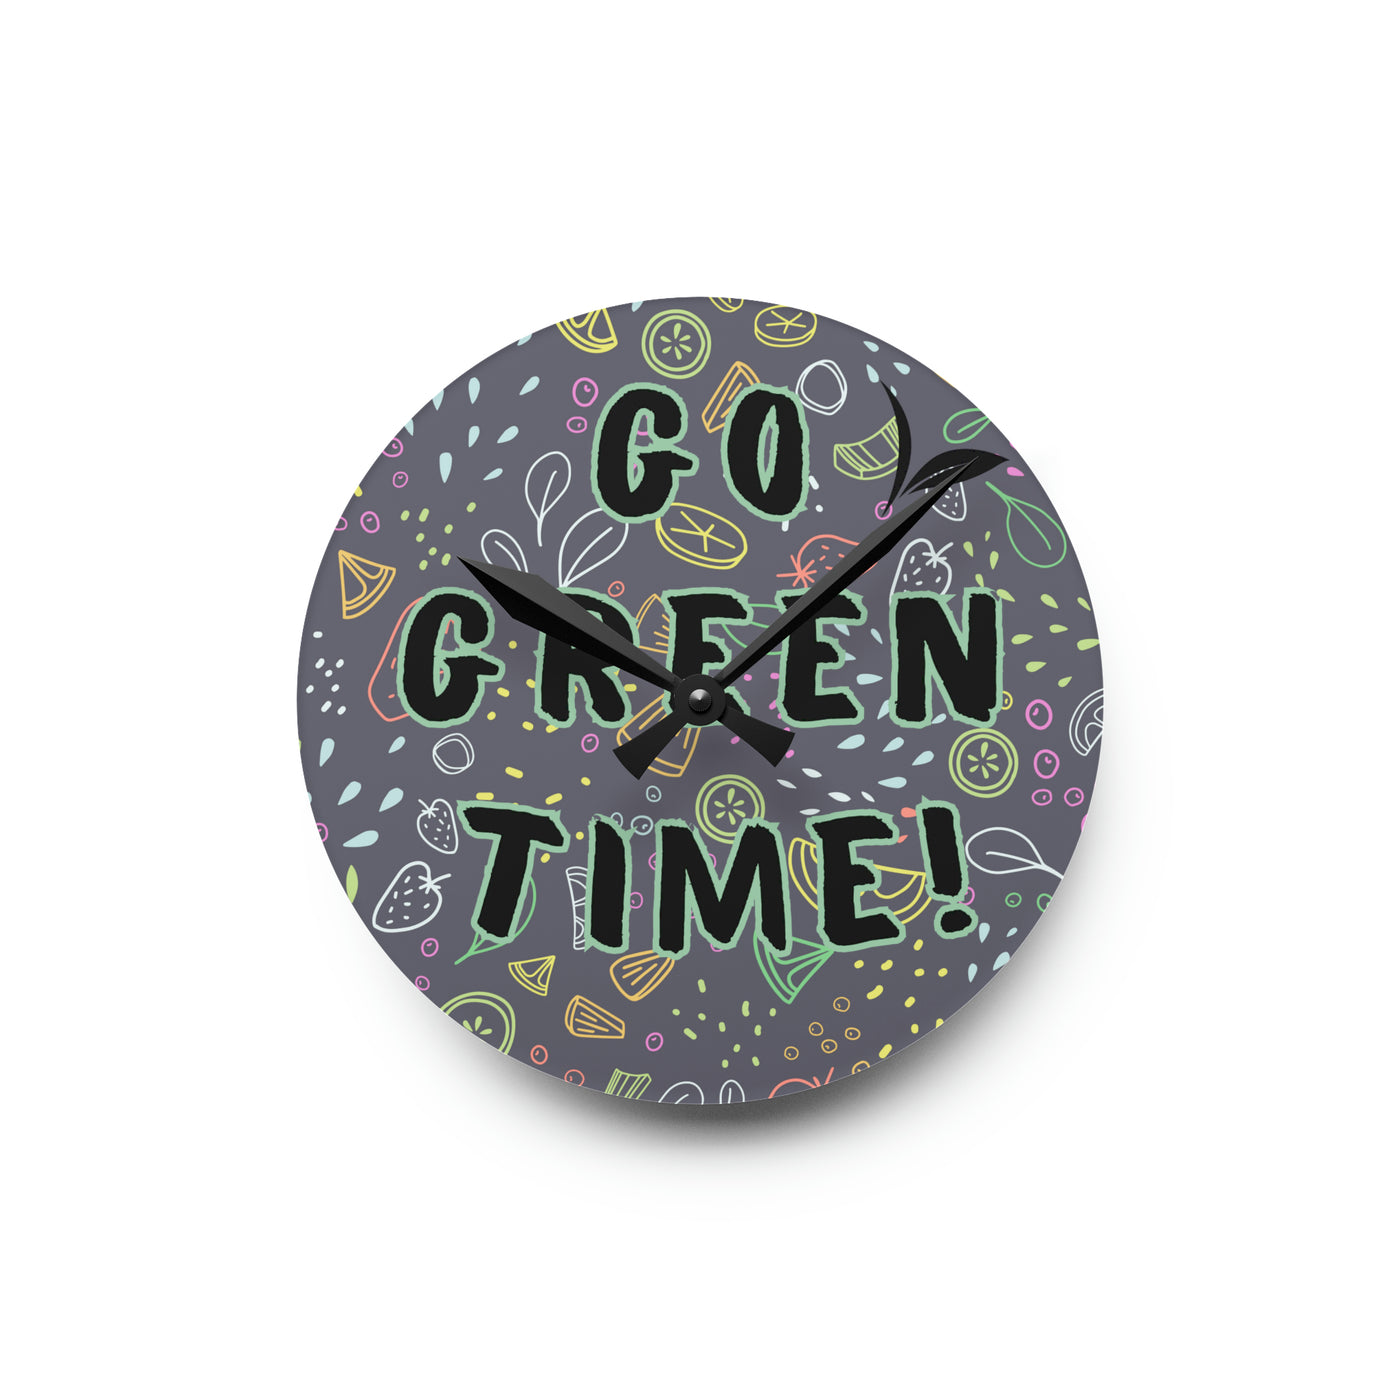 GO GREEN TIME Acrylic Wall Clock - Round or square